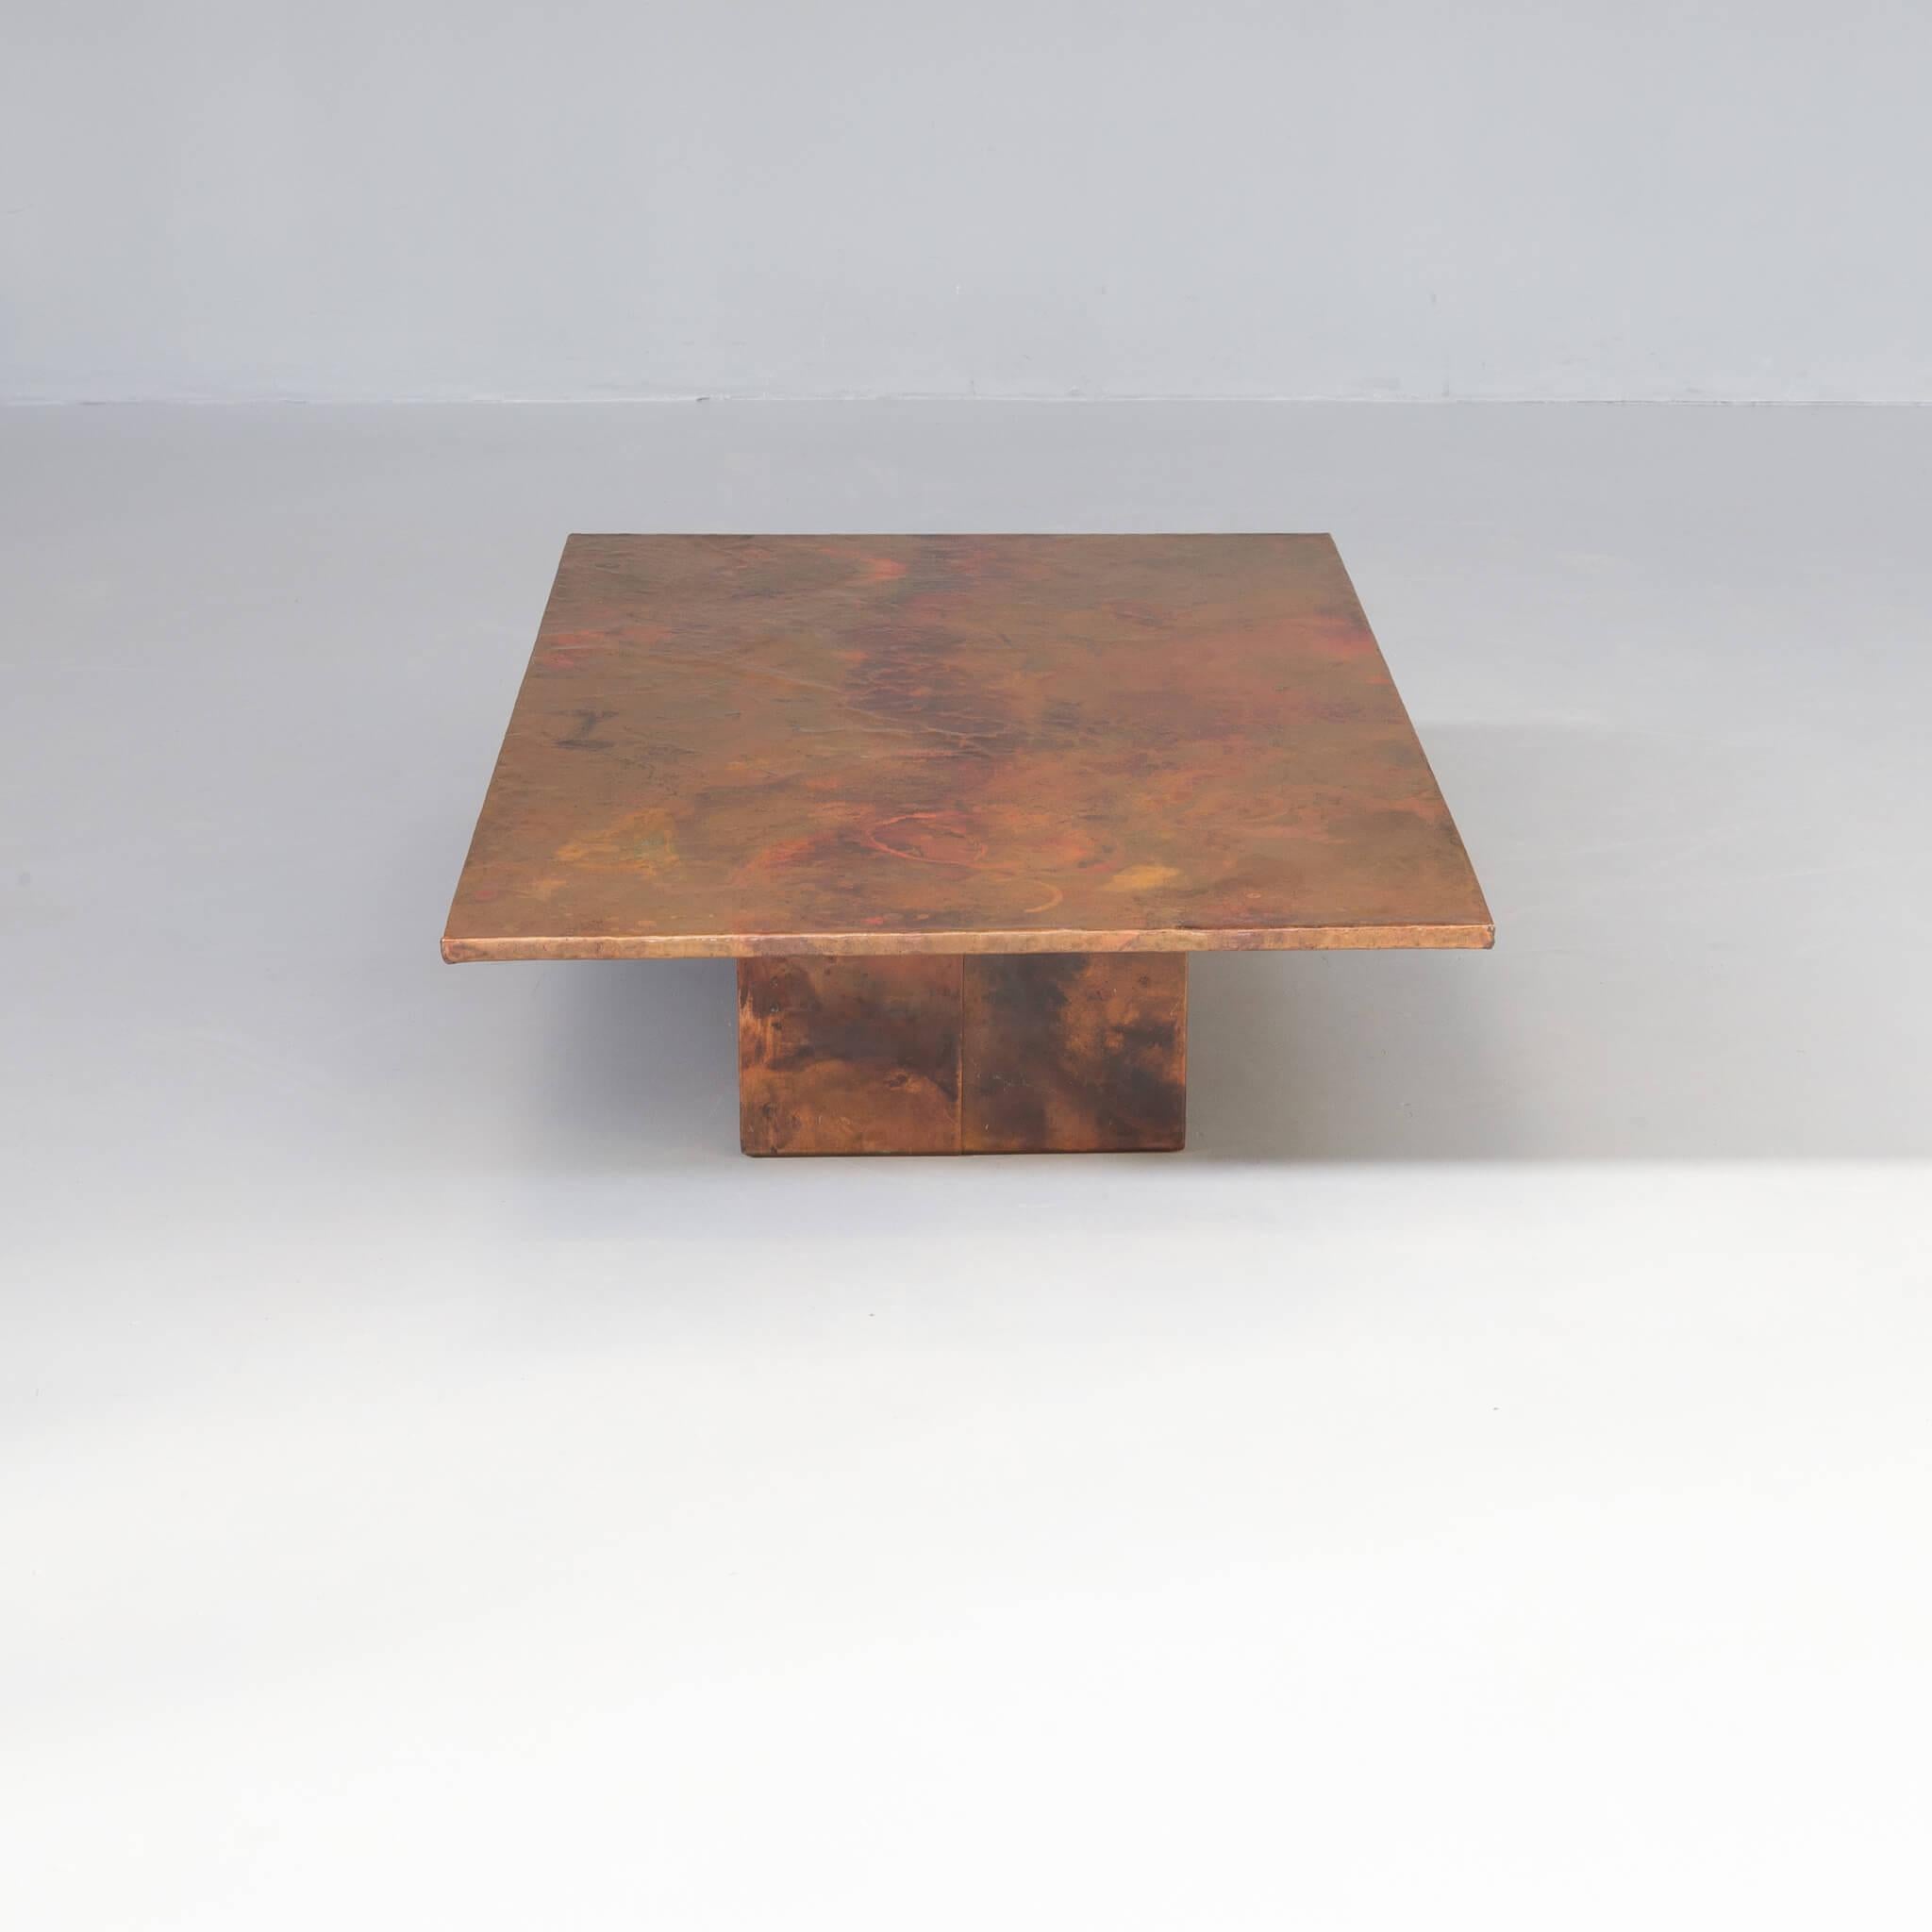 Dutch Handmade Copper Etched Coffee Table